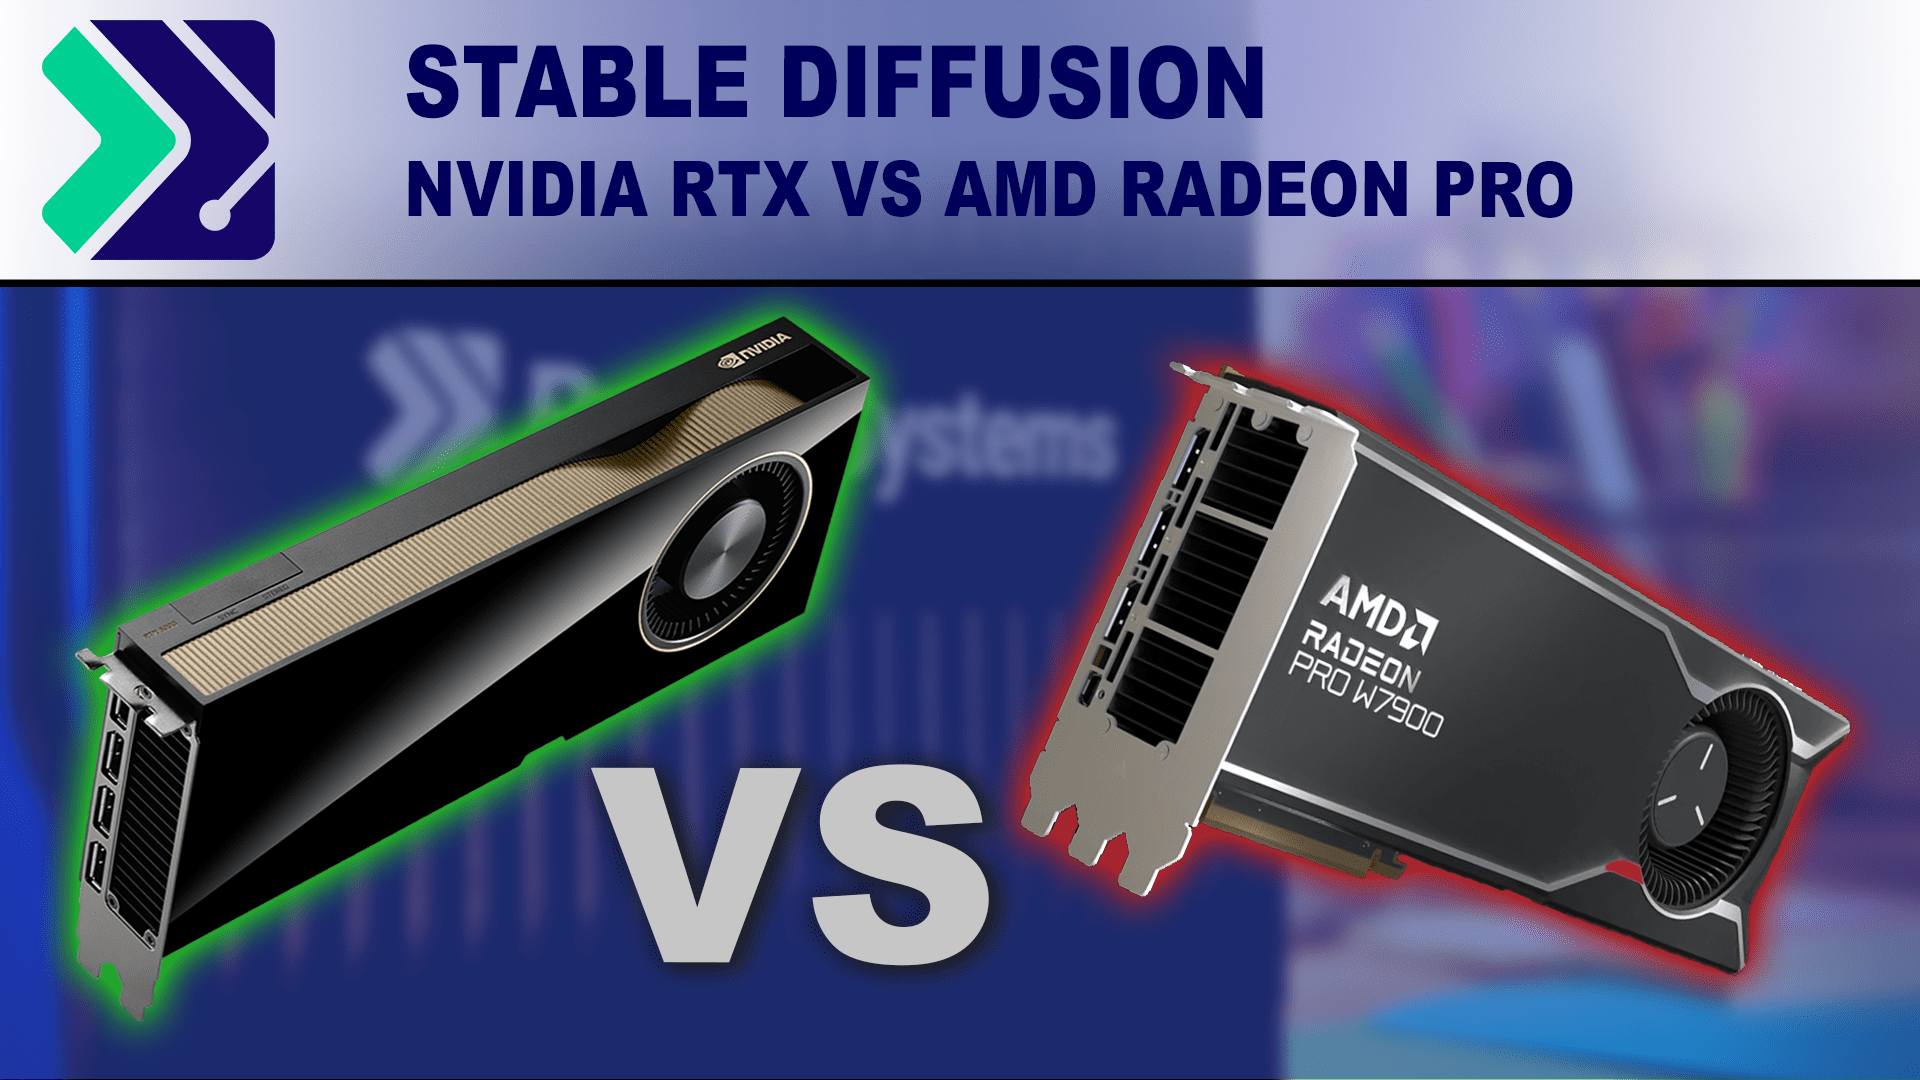 NVIDIA RTX A6000 and AMD Radeon PRO W7900 on a blue background with a "vs" between them.